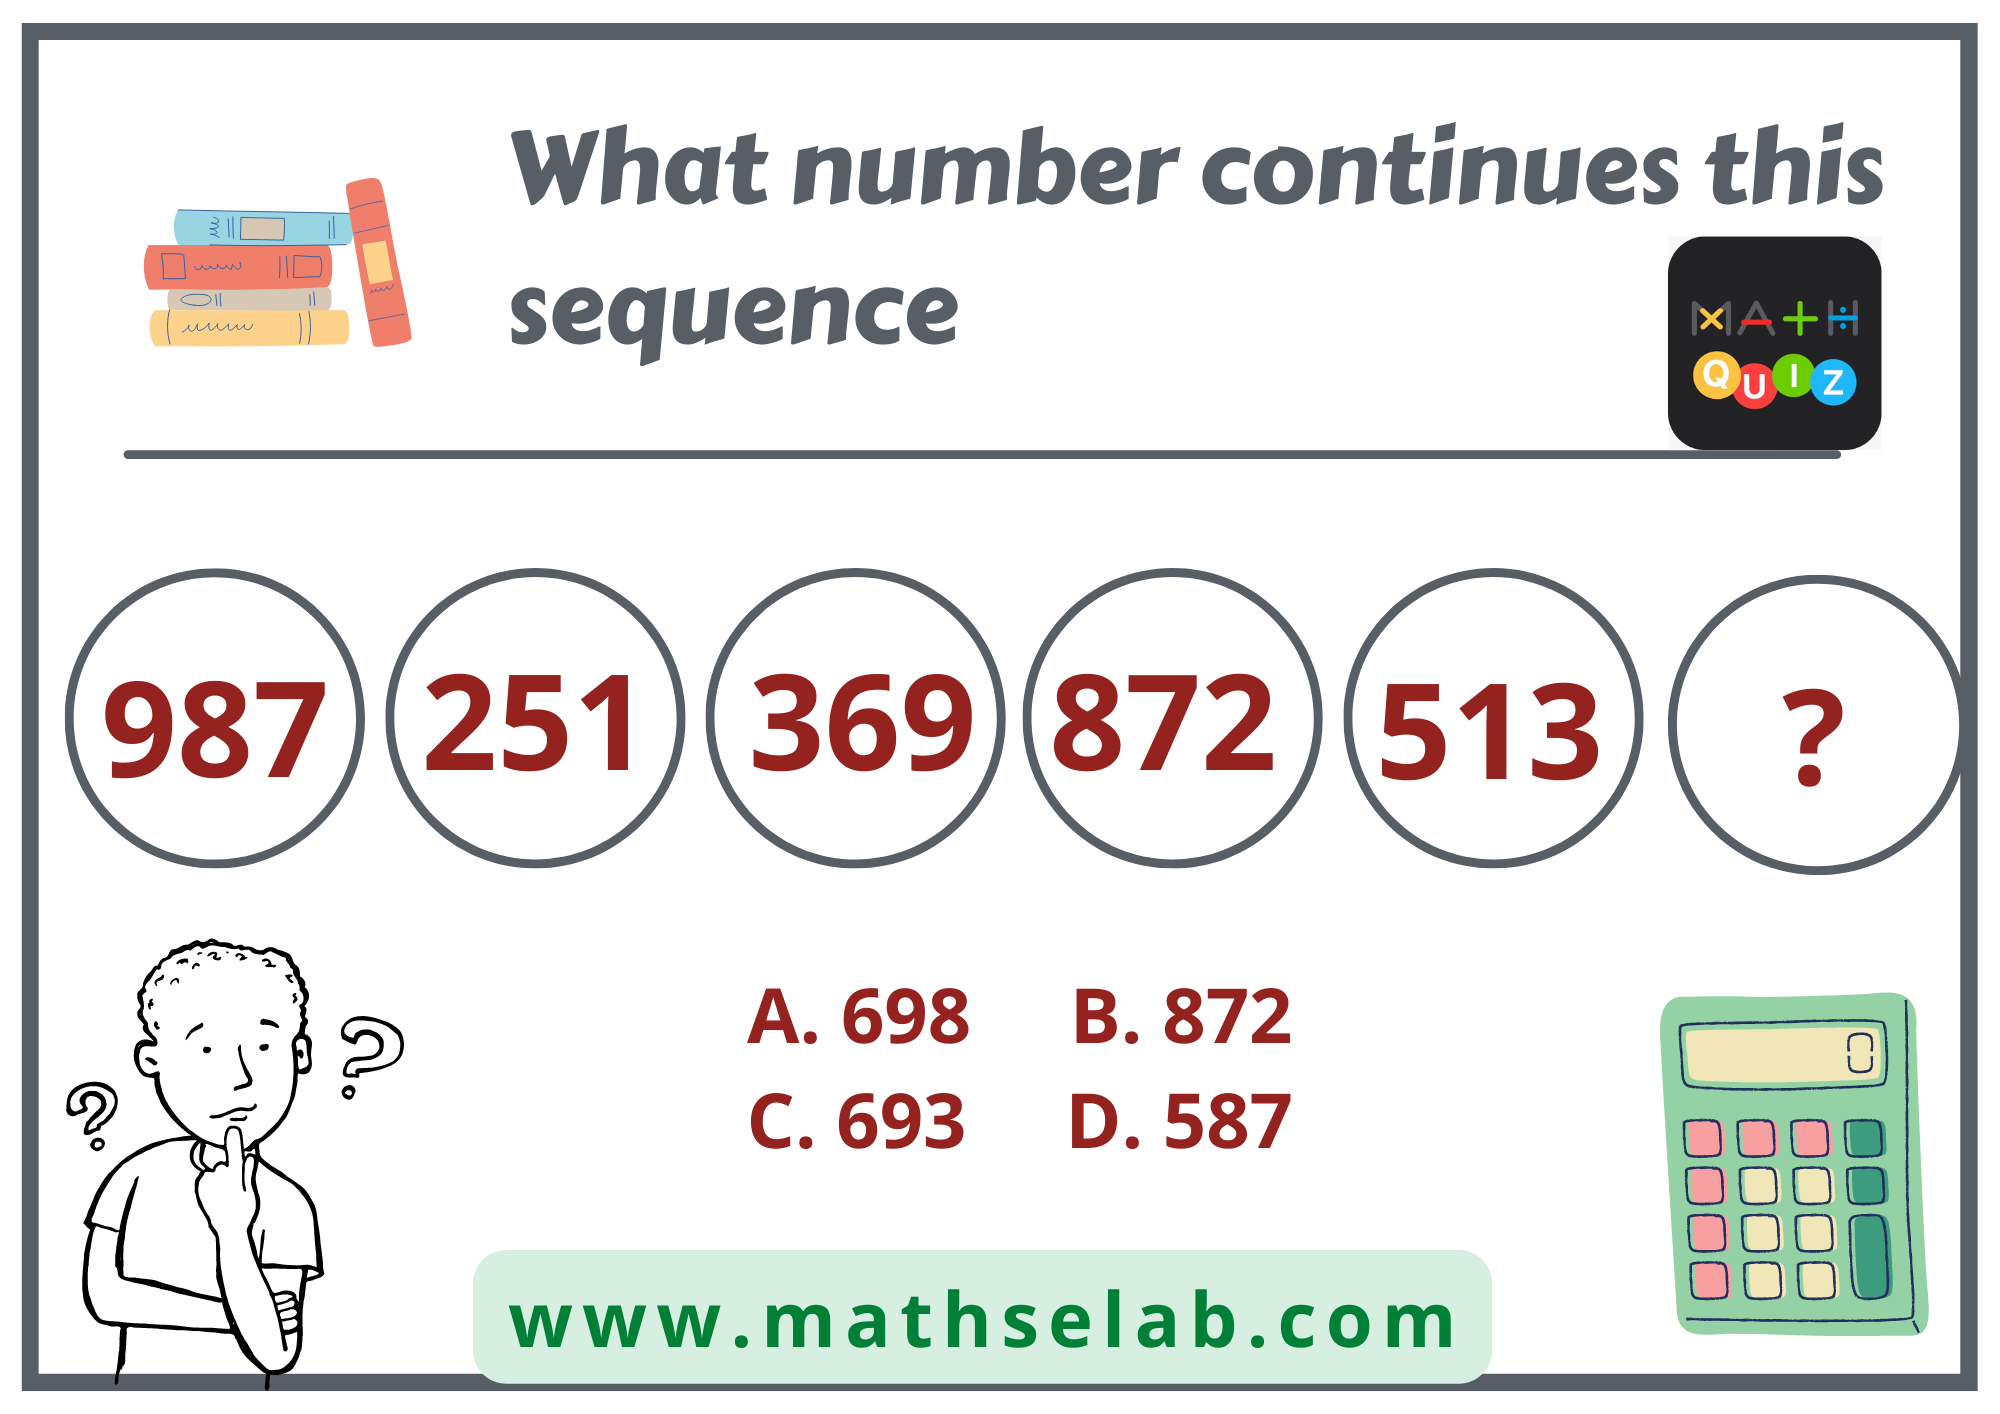 What number continues this sequence 987, 251, 369, 872, 513, - www.mathselab.com